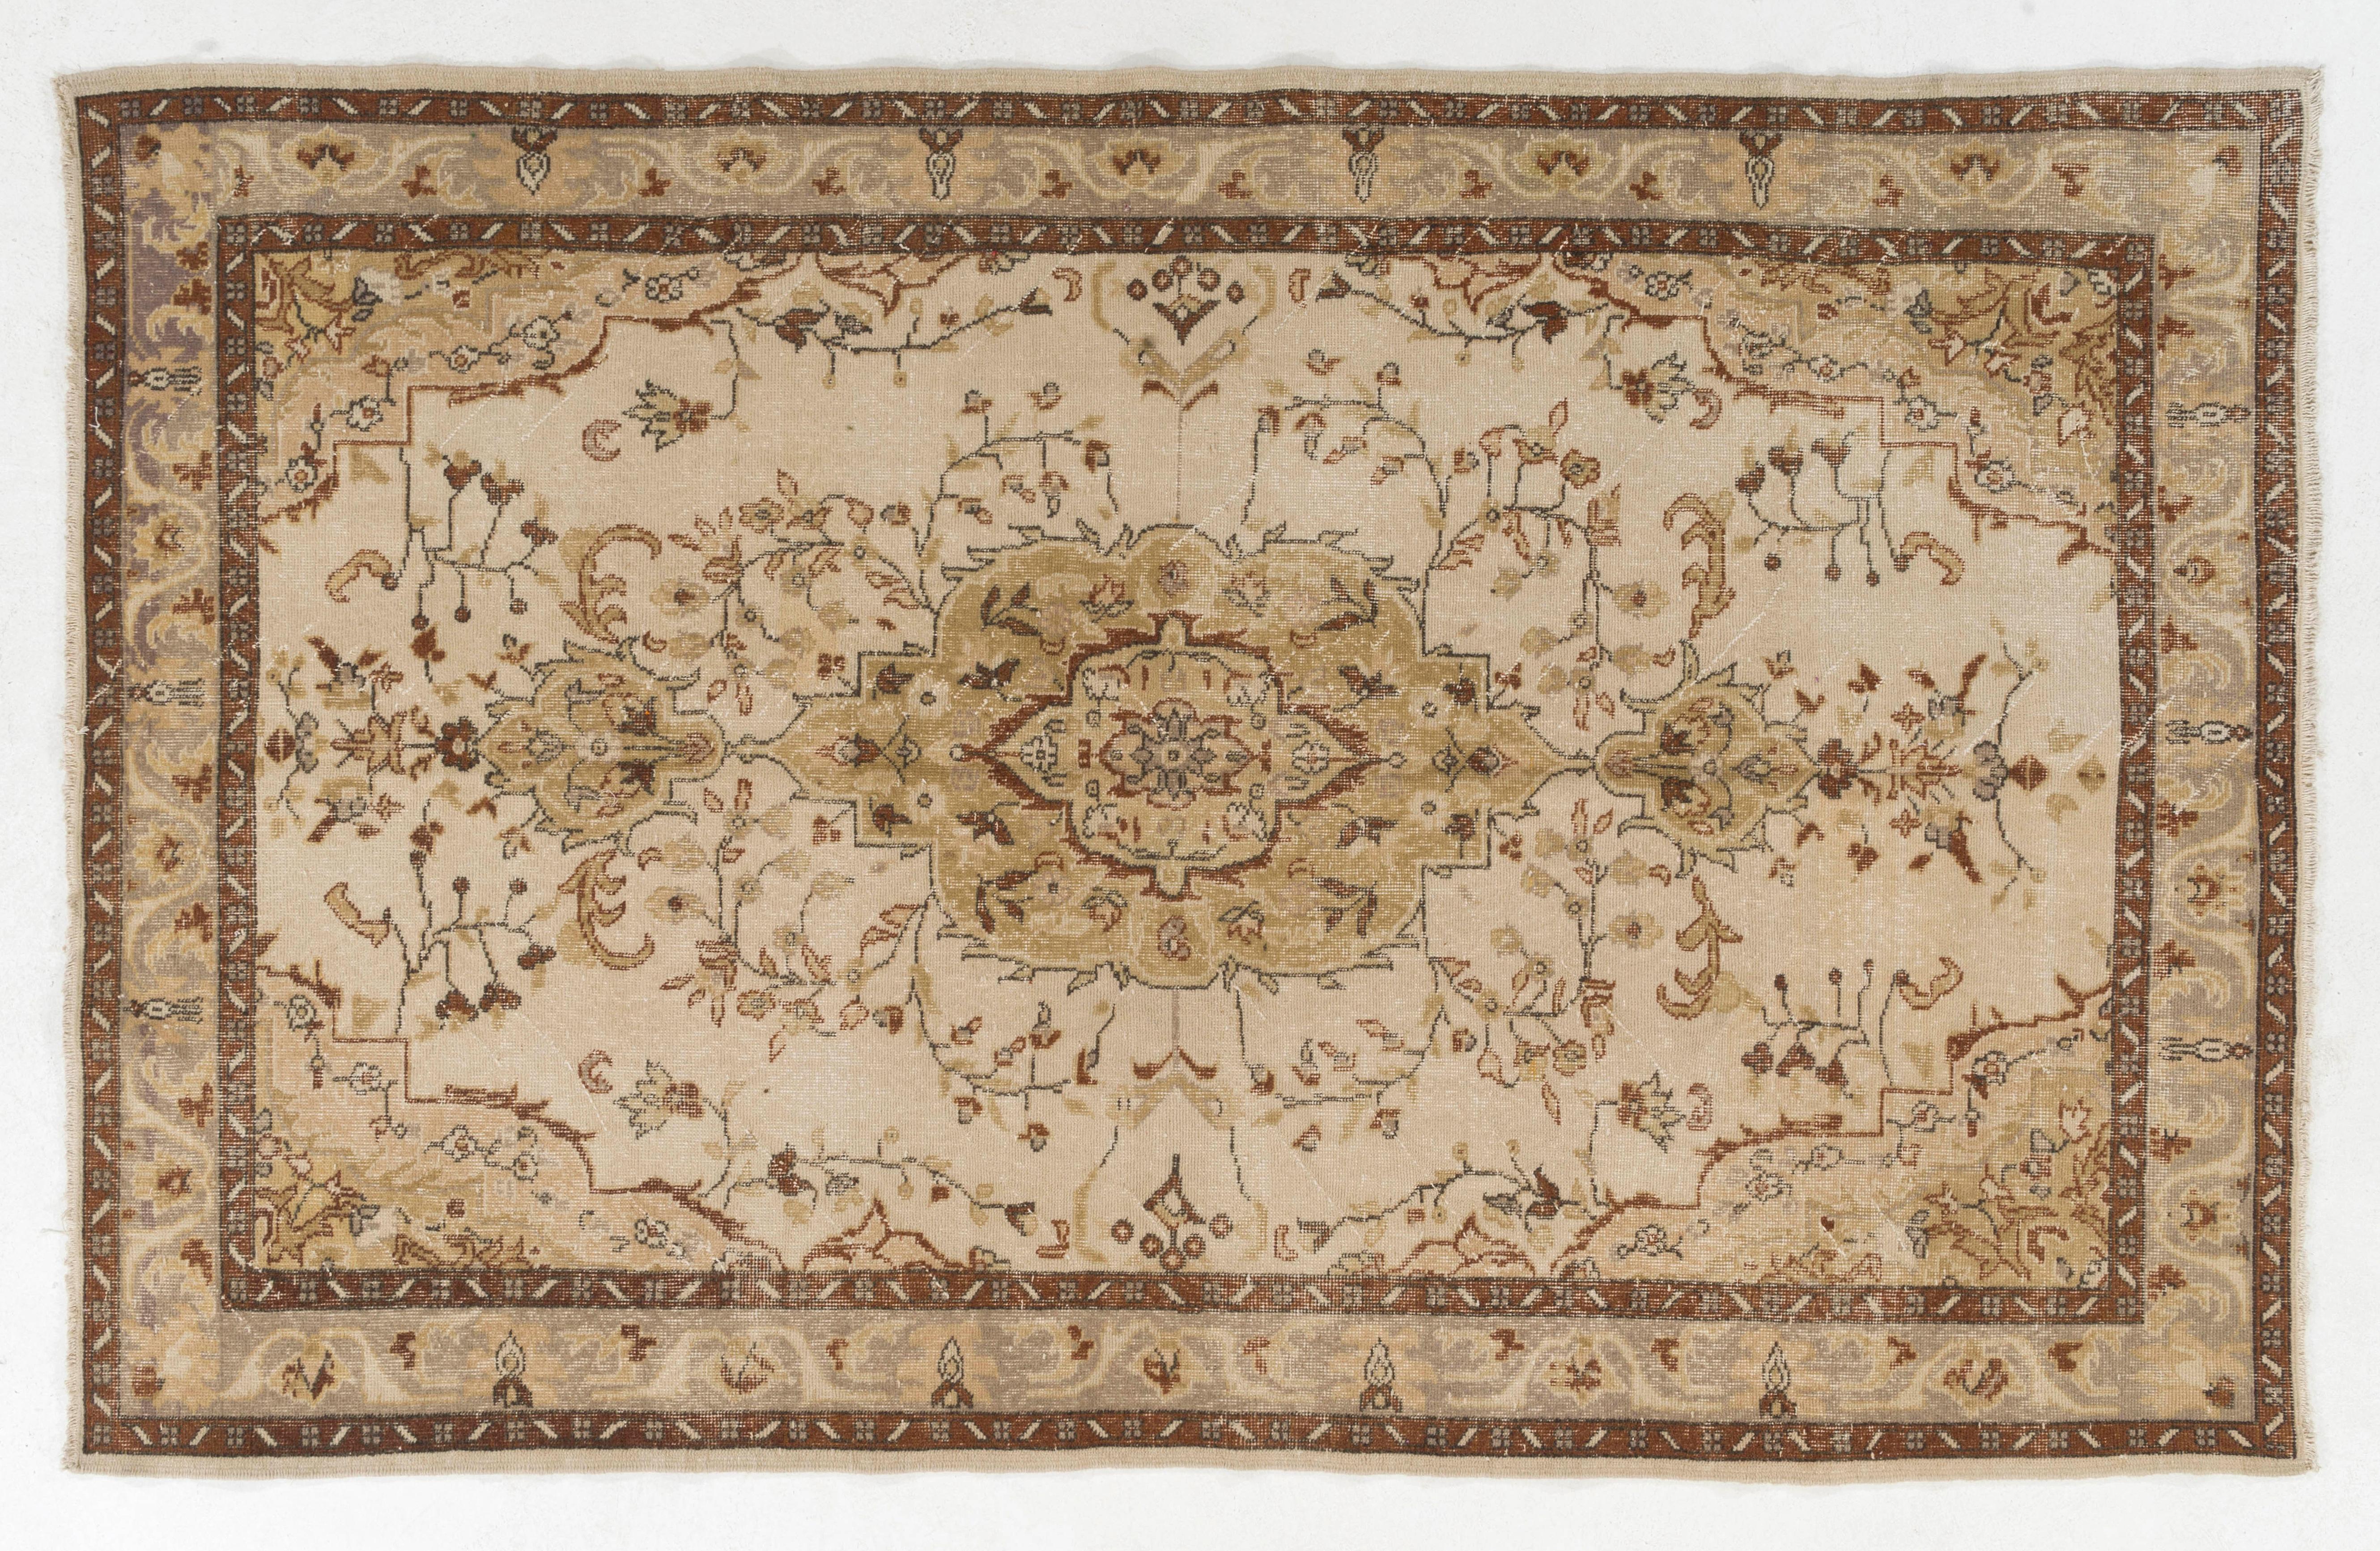 6x9.5 Ft Handmade Turkish Vintage Rug with Neutral Color, Woolen Carpet in Beige In Good Condition For Sale In Philadelphia, PA